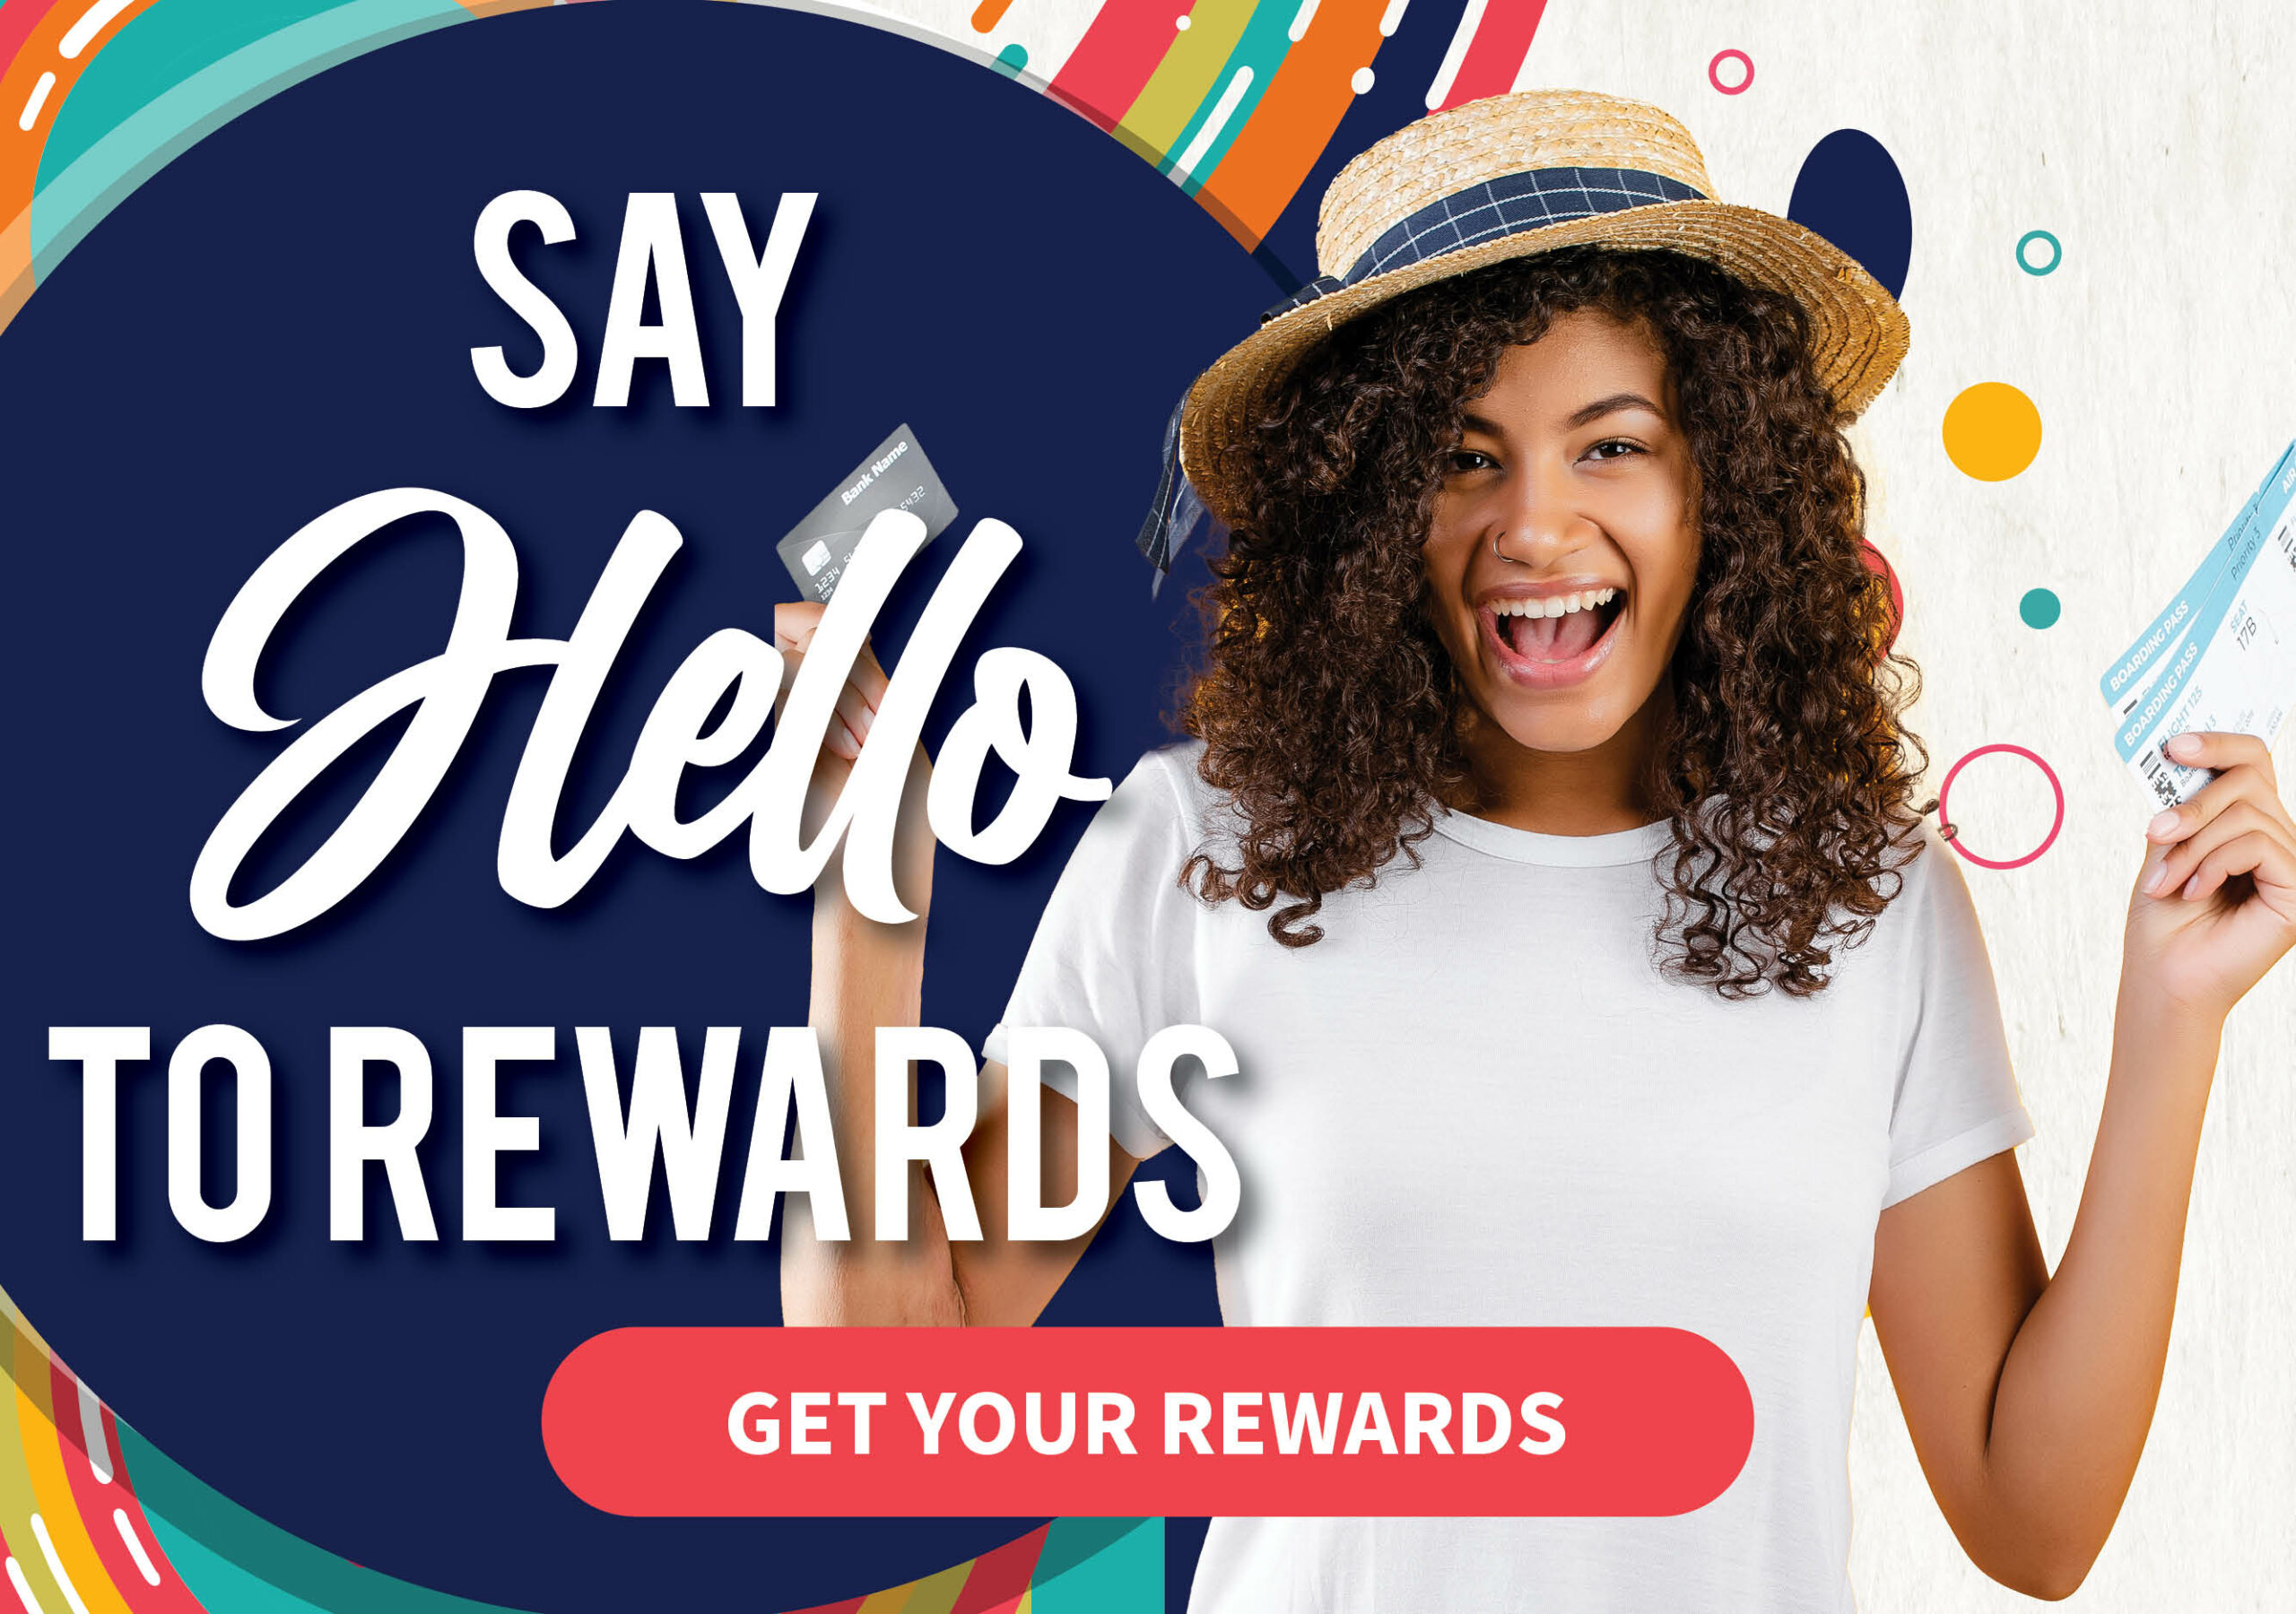 African American woman holding plane tickets and MTFCU rewards debit card with text saying "say hello to rewards"